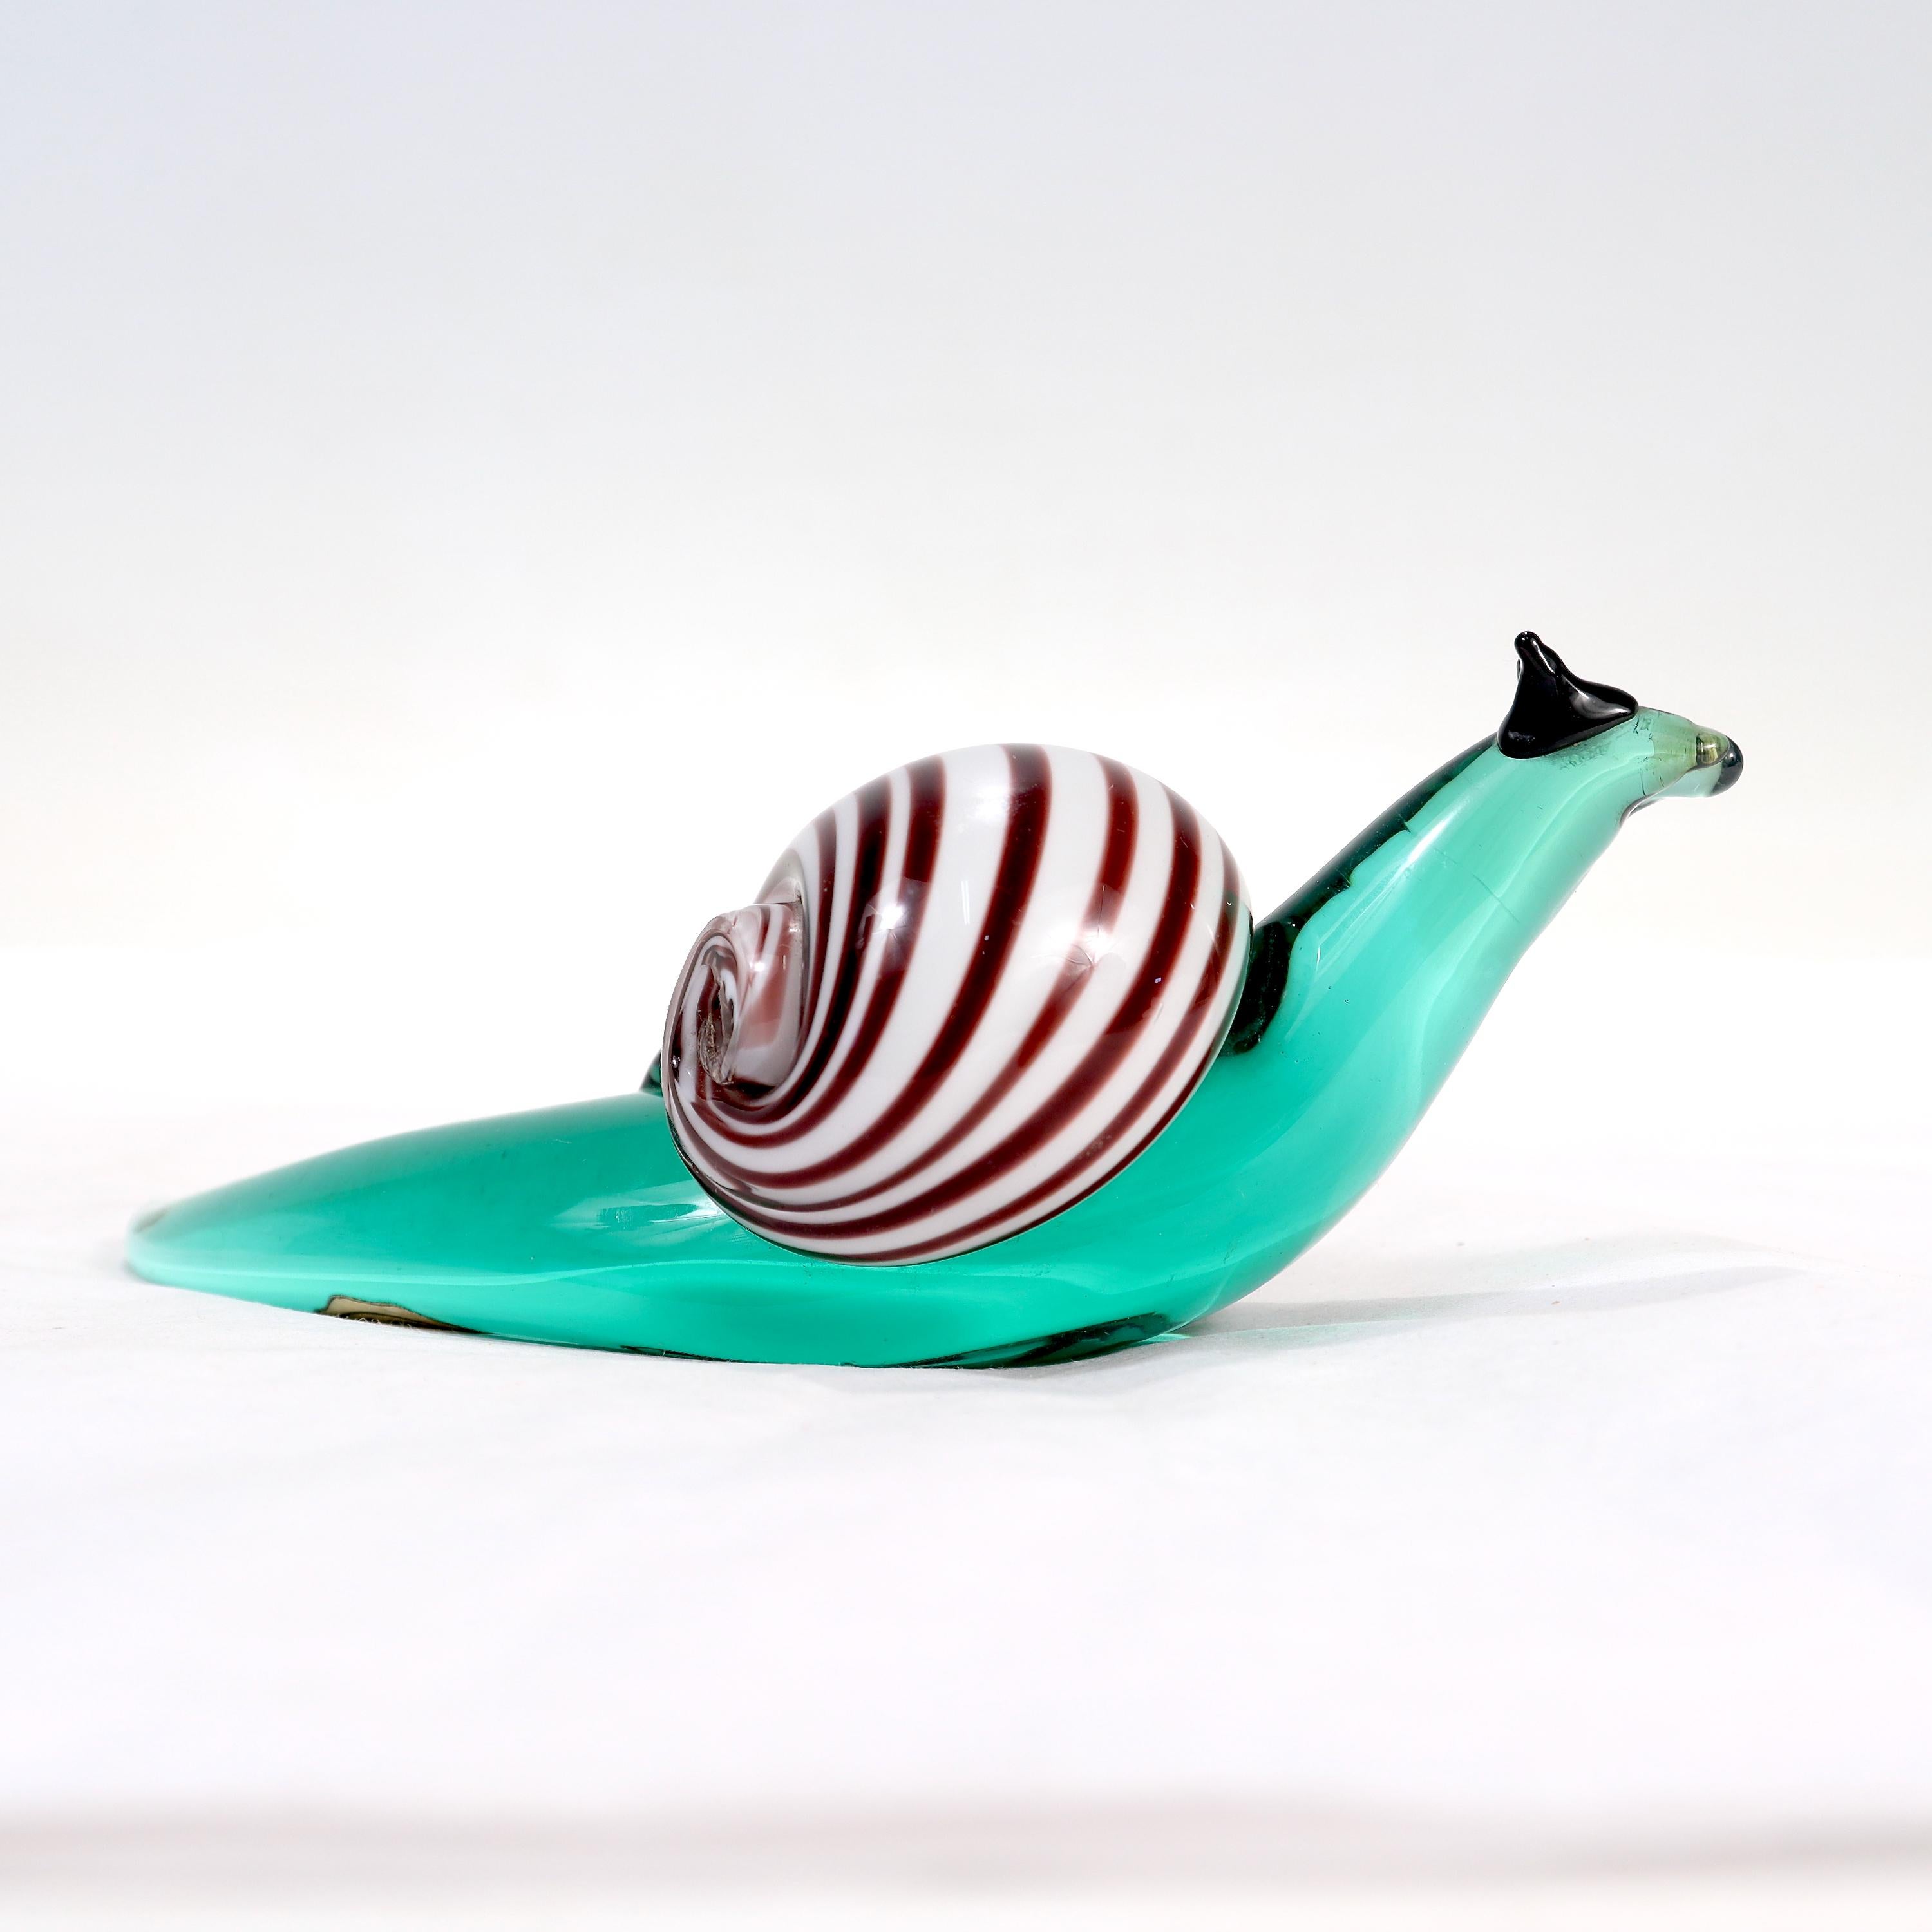 Mid-Century Modern Signed & Labeled Salviati Venetian / Murano Art Glass Snail Paperweight Figurine For Sale